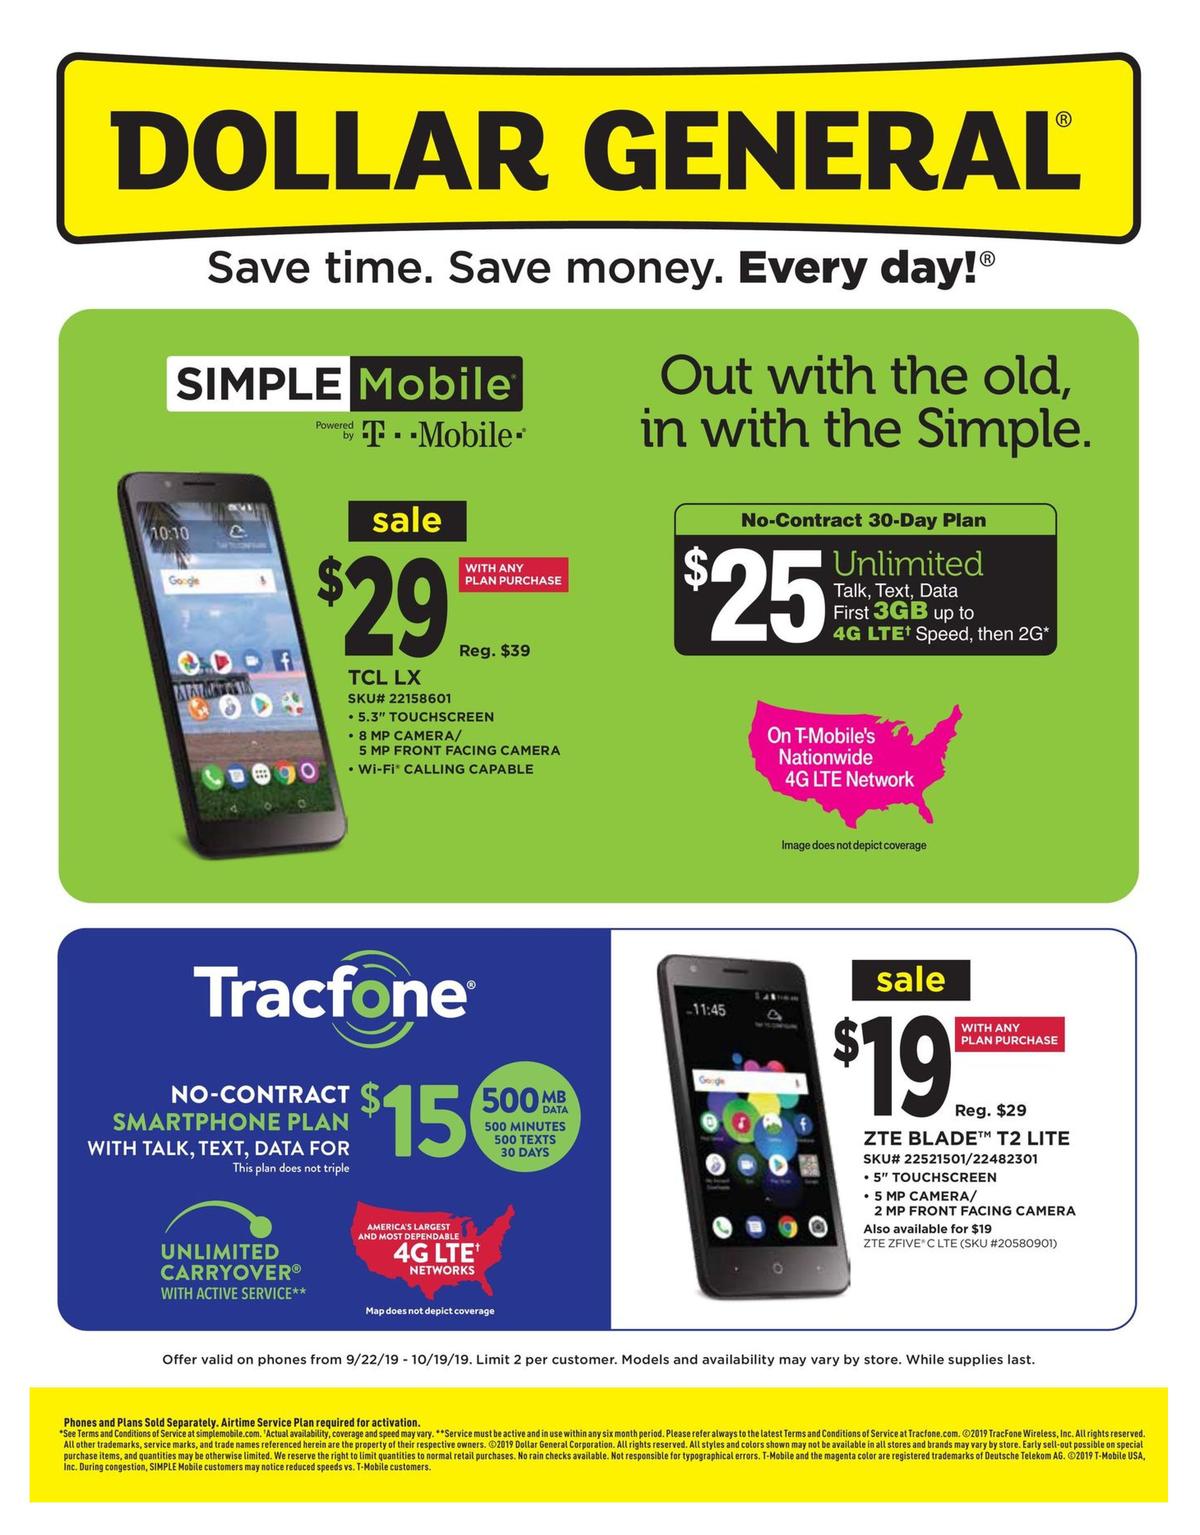 Dollar General Weekly Wireless Specials Weekly Ad from September 22